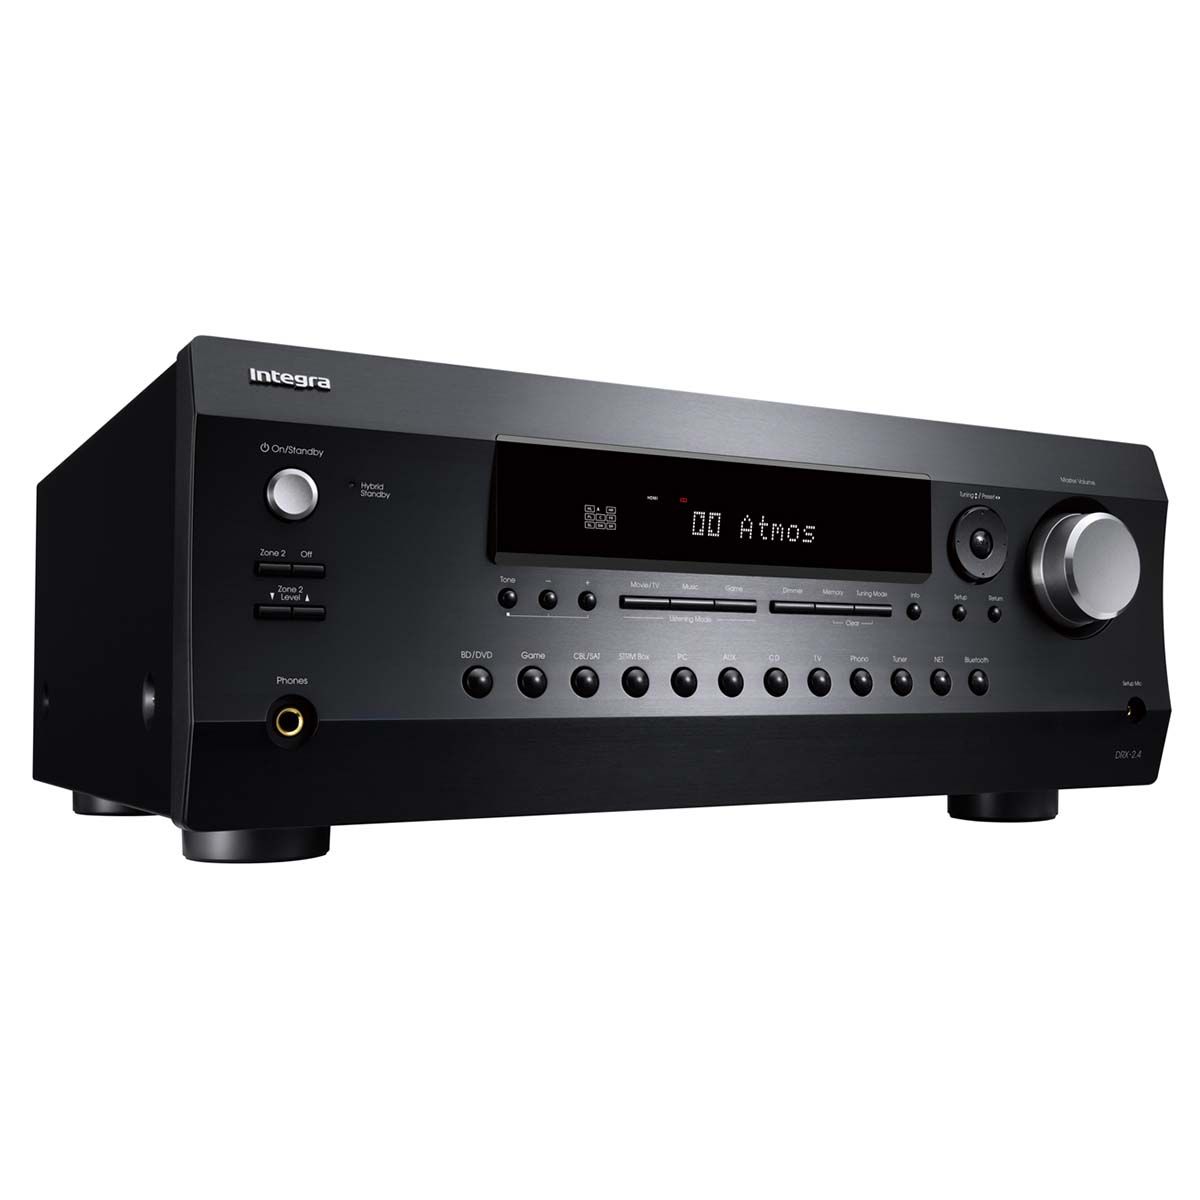 Integra DRX 2.4 Home Theater Receiver, front right angle